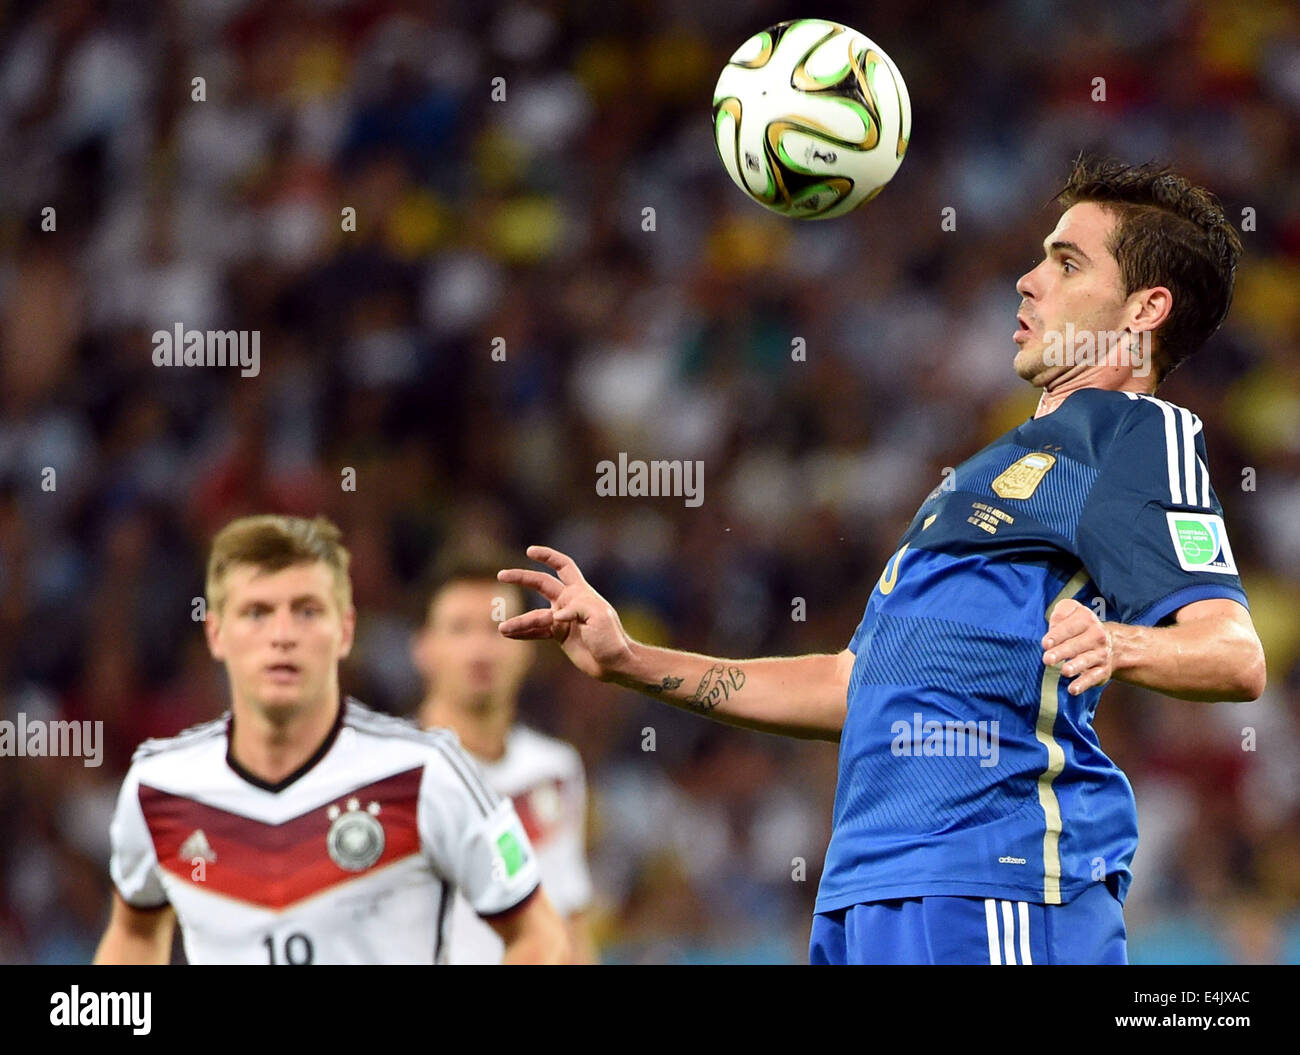 Rio De Janeiro, Brazil. 13th July, 2014. Argentina's Fernando Gago (R) controls the ball during the final match between Germany and Argentina of 2014 FIFA World Cup at the Estadio do Maracana Stadium in Rio de Janeiro, Brazil, on July 13, 2014. Germany won 1-0 over Argentina after 120 minutes and took its fourth World Cup title on Sunday. Credit:  Liu Dawei/Xinhua/Alamy Live News Stock Photo